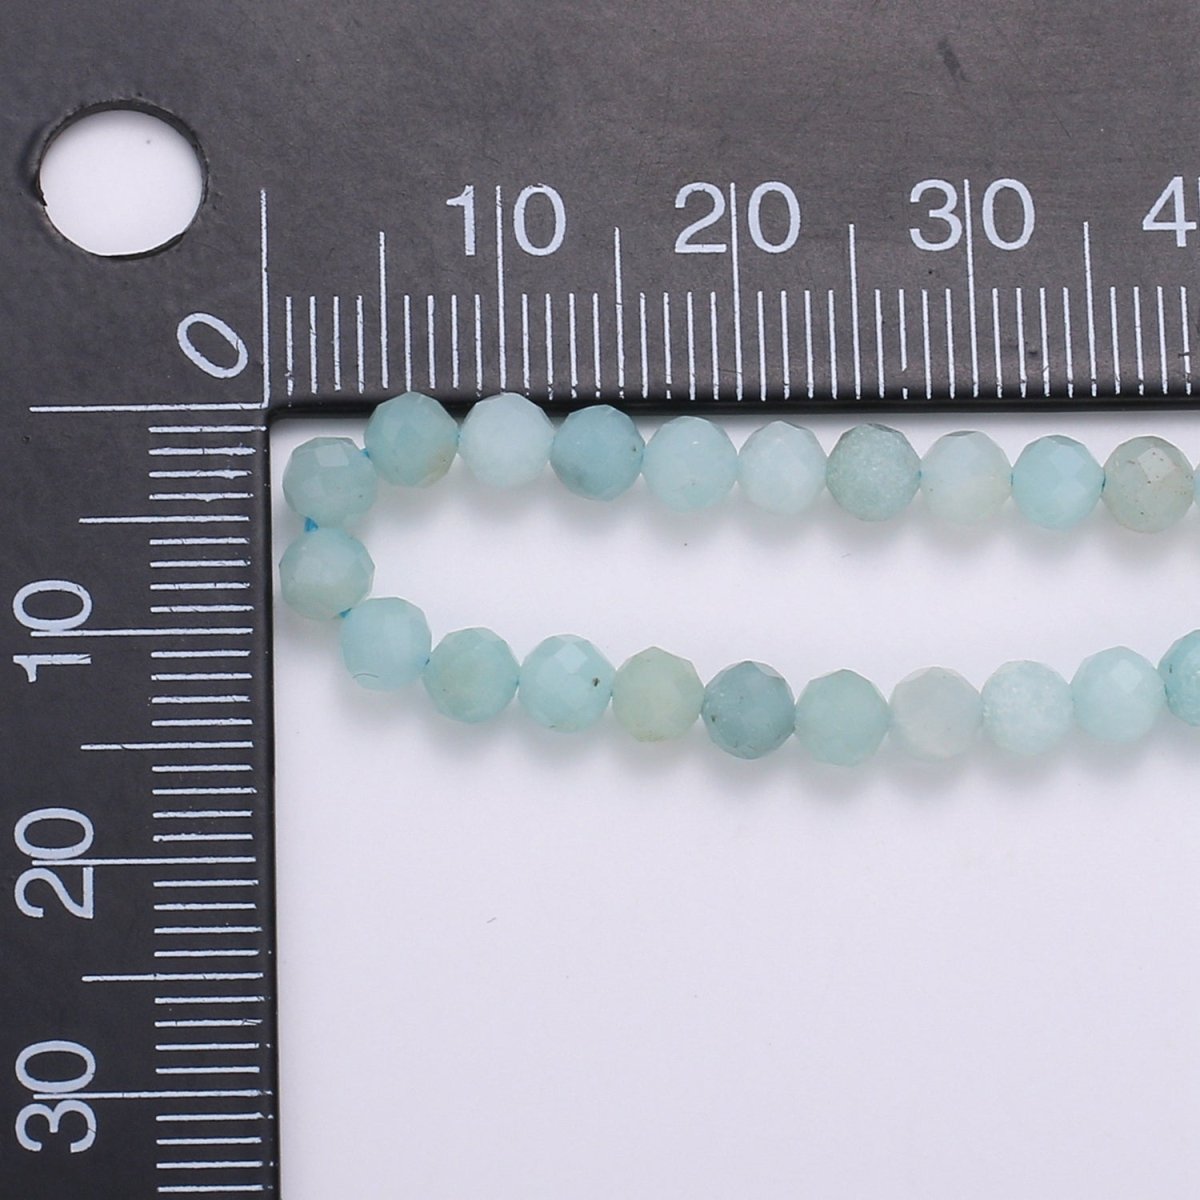 Stunning Amazonite Gemstone Tiny Dainty Bead Gold Necklace, Necklace For Women, Precious Stone Bead Necklace | WA-013 Clearance Pricing - DLUXCA